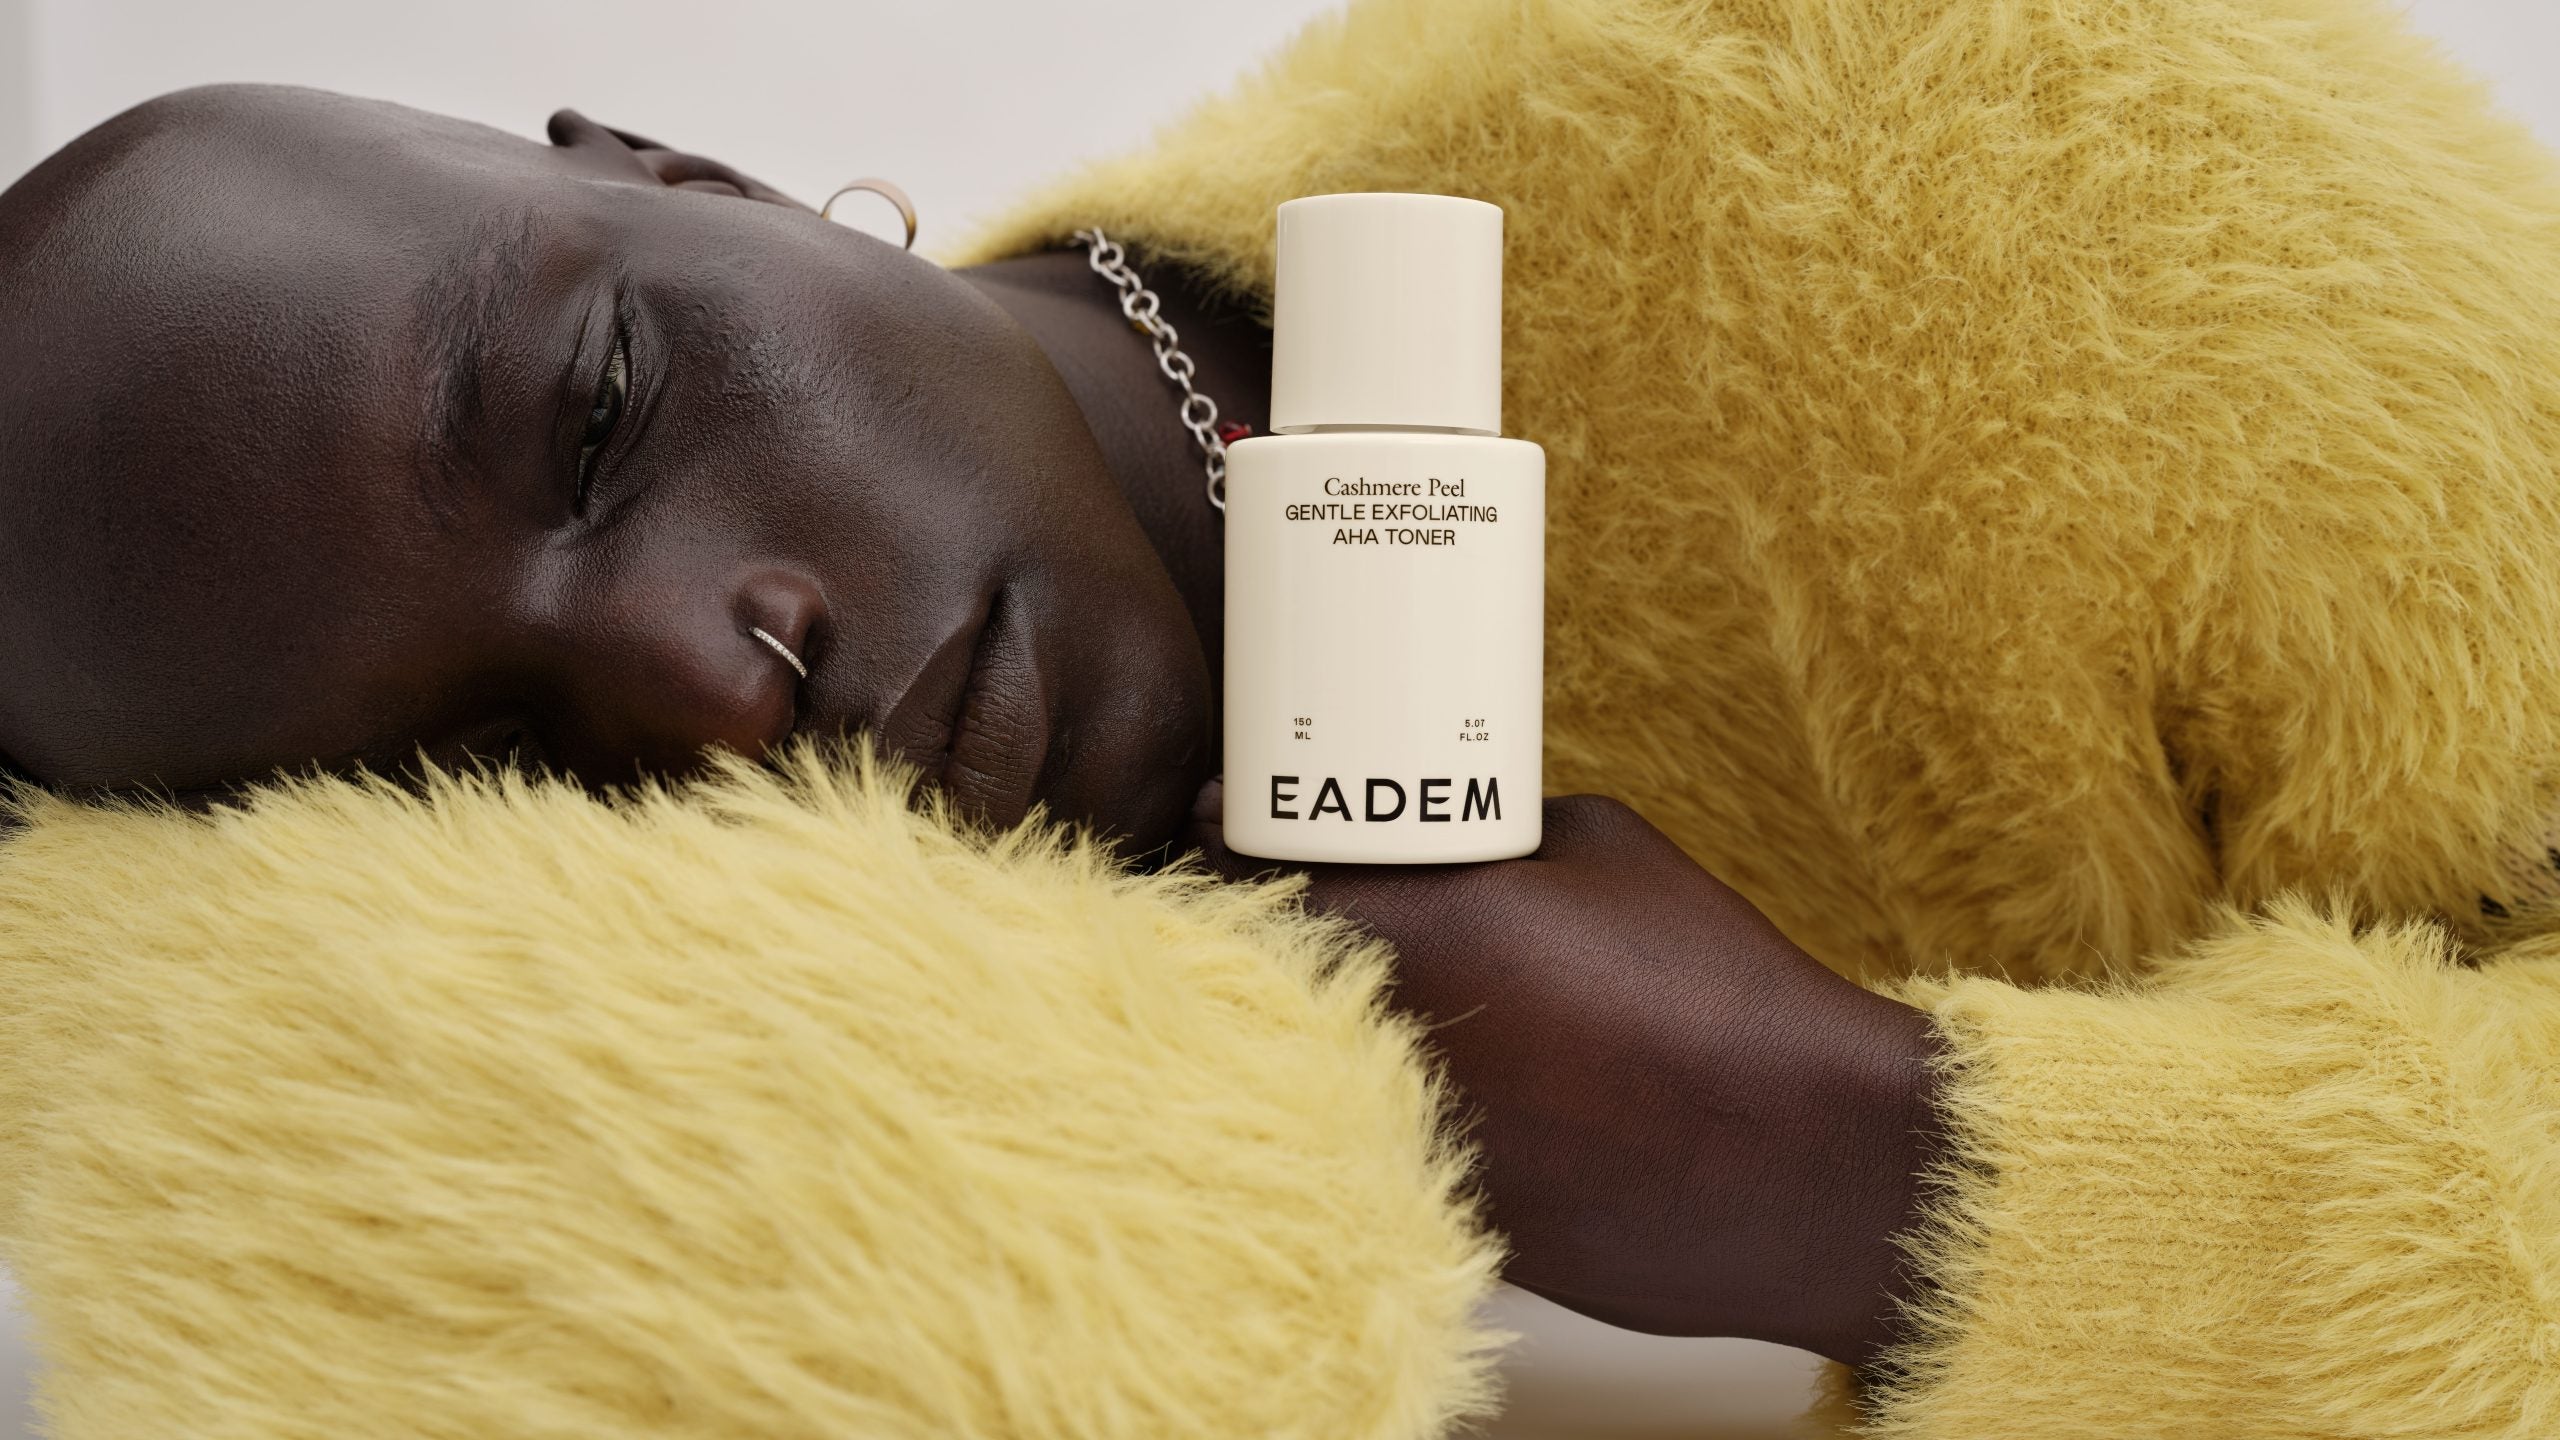 EADEM's New Cashmere Peel Does It All